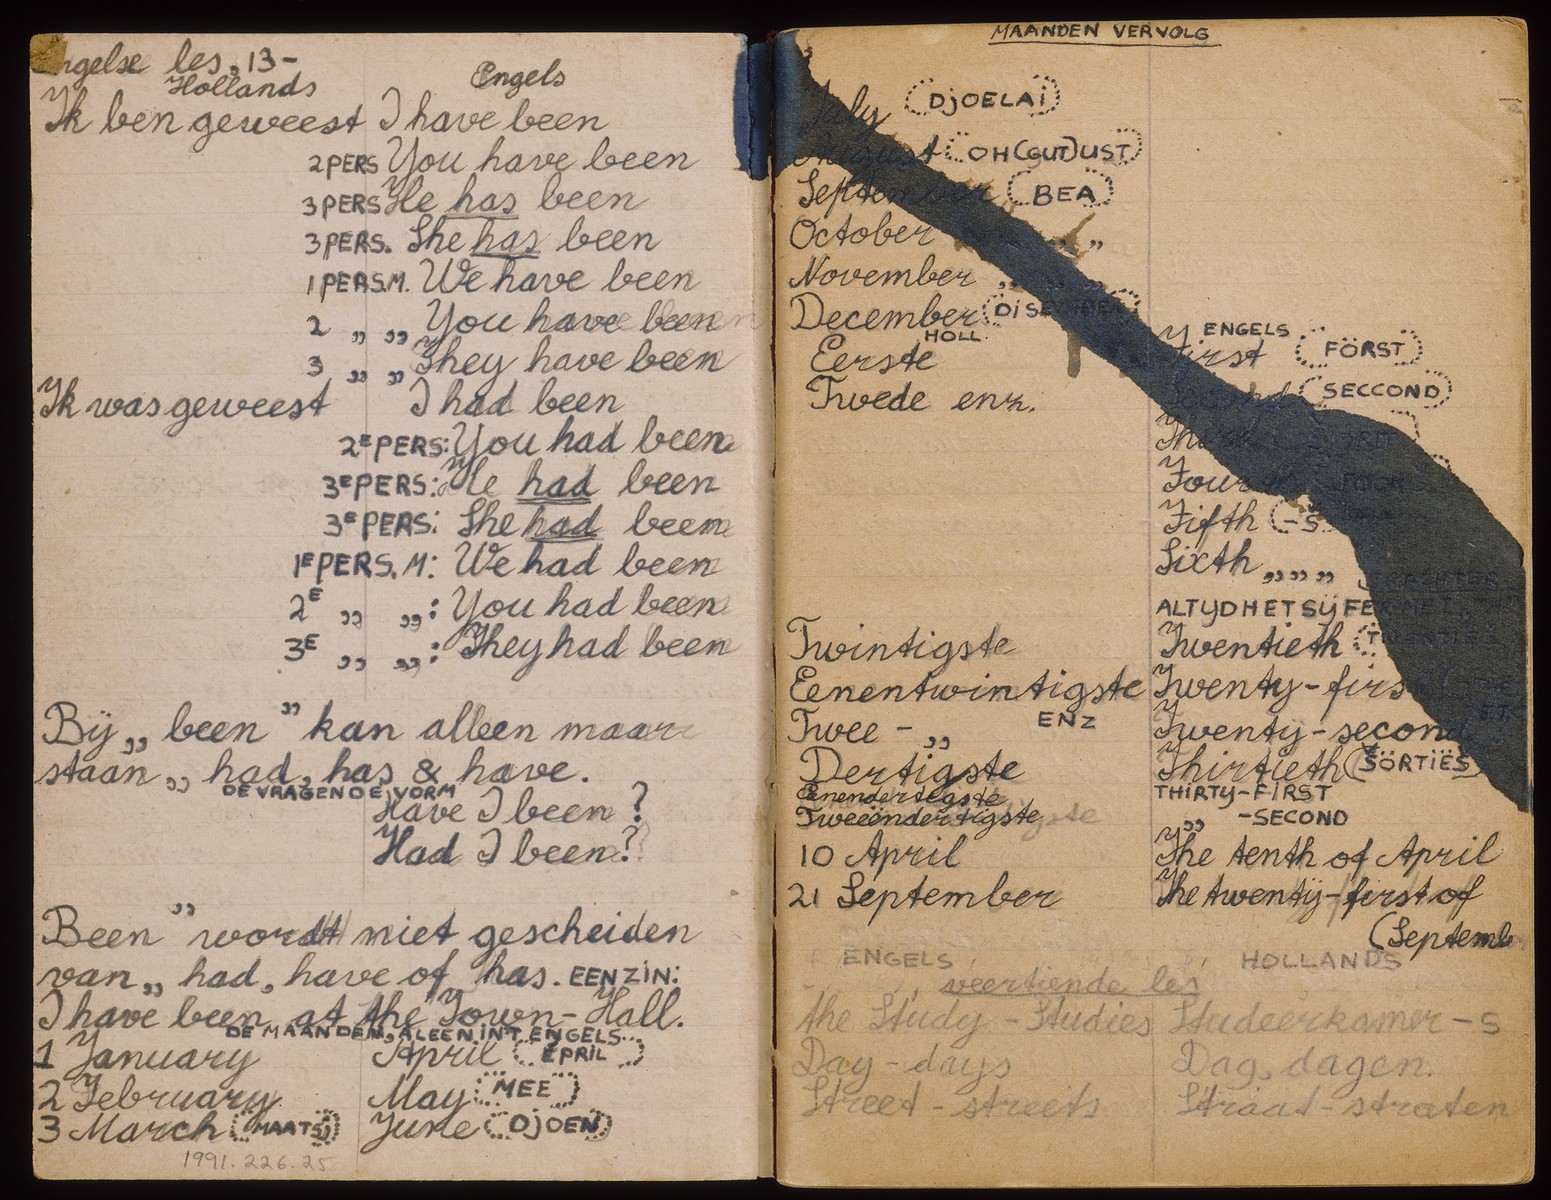 An open page of a book of English lessons handwritten in Dutch and English by Albert and Max Heppner while they were living in hiding in Deurne-Zeilberg, Holland.  

The volume includes two books in one: the first is "In Grove Trekken, Onze Geschiedenis," written by Max Heppner, and the second, a book of English lessons, written by both Max and Albert.